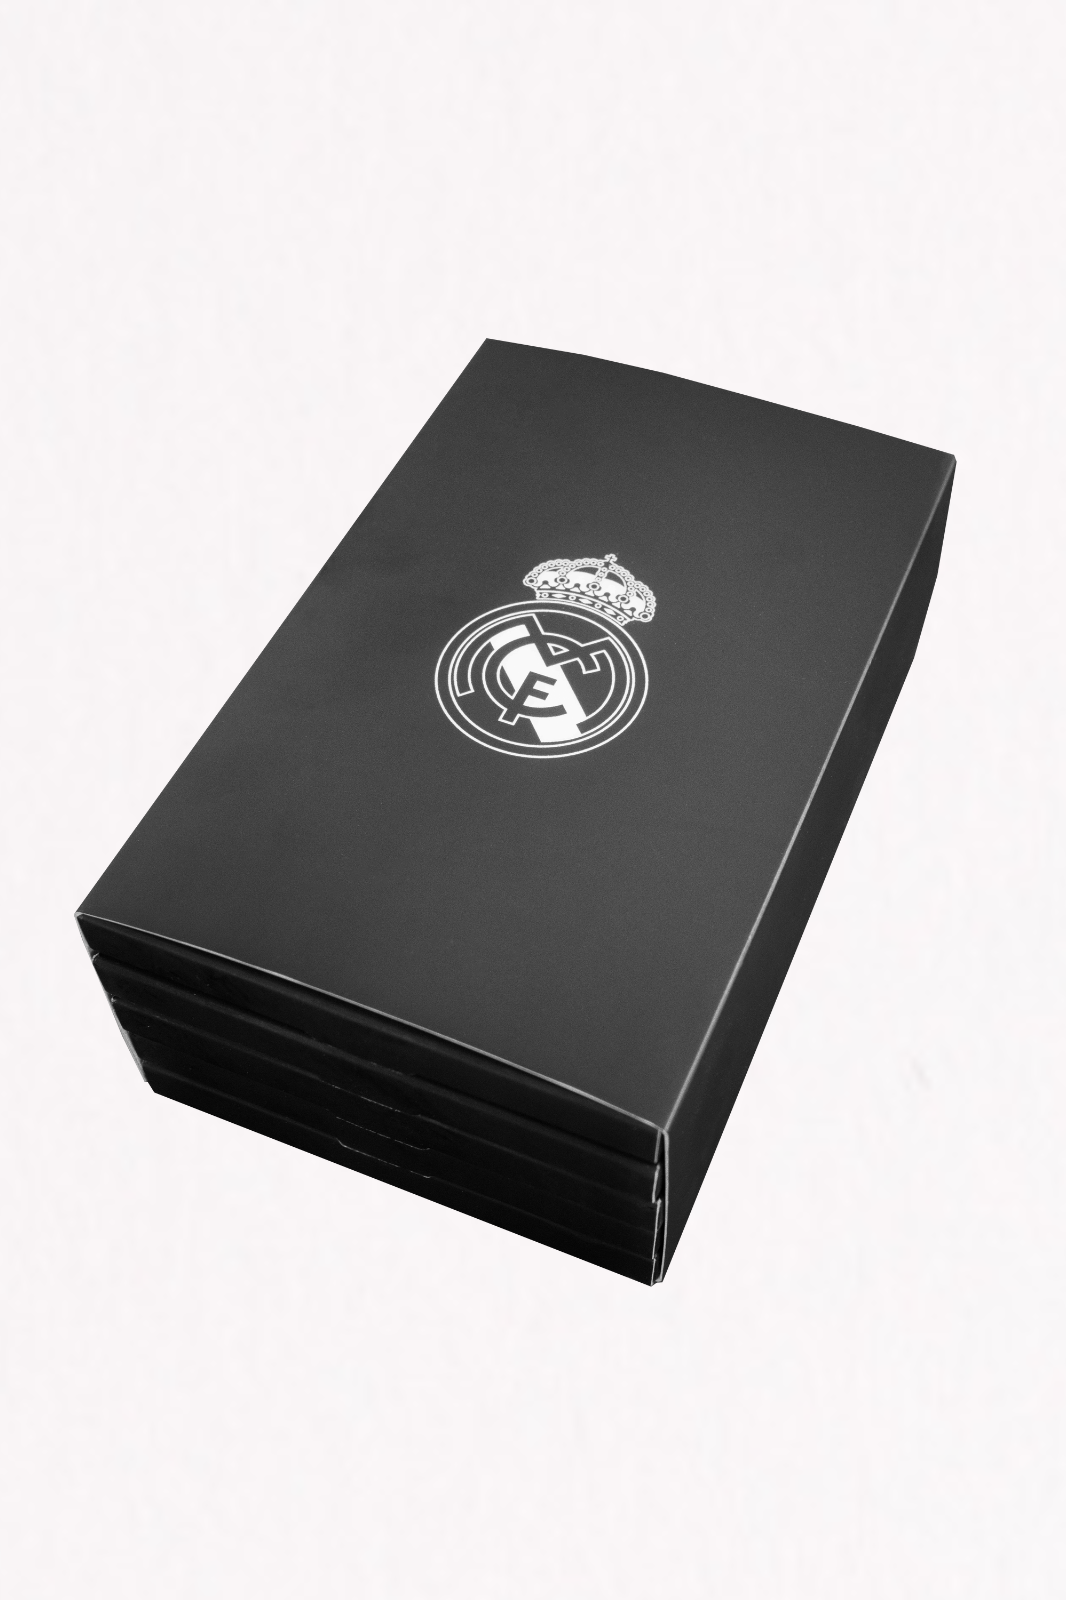 Real Madrid - Pack Misterioso de 8 Icons 100 ejemplares